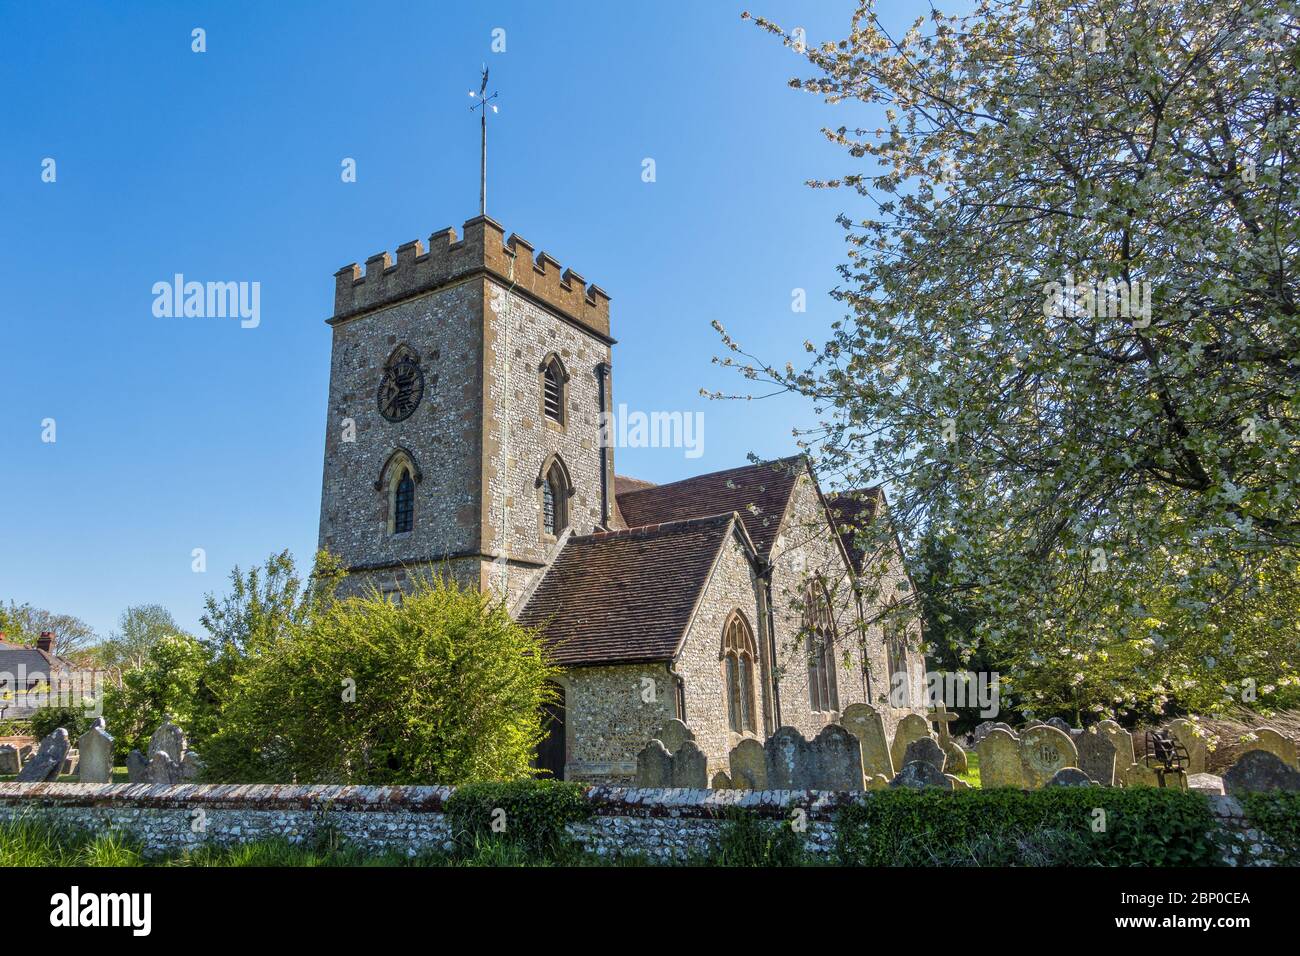 Springtime at St Andrew's Church in the beautiful village of Owslebury in Hampshire, England, UK Stock Photo